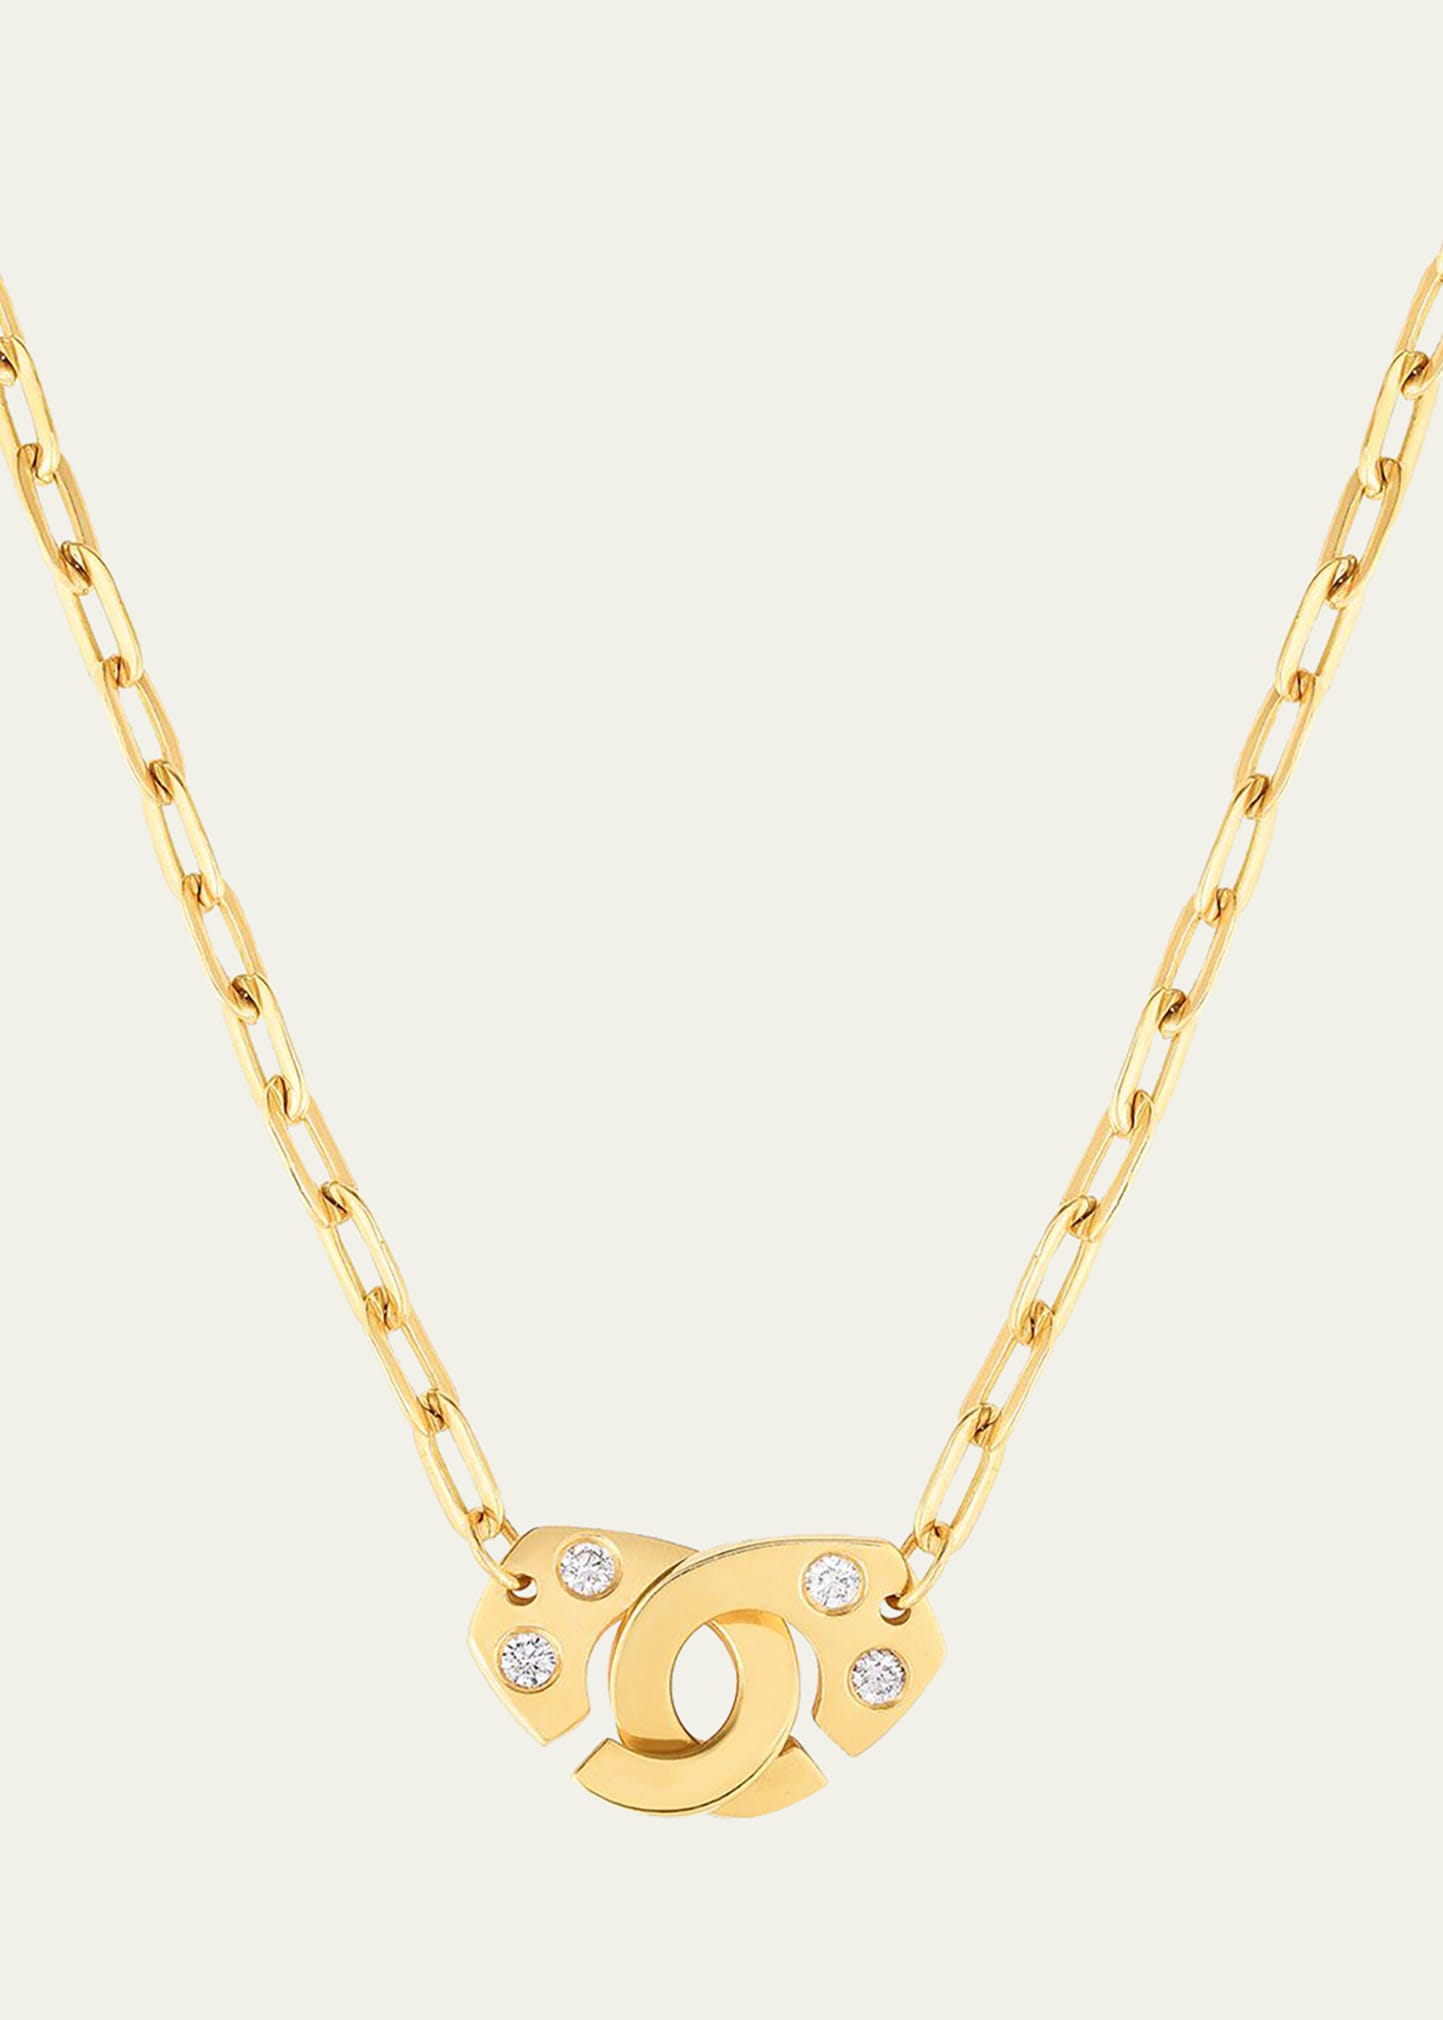 Audrey C. Jewels Extra Large Partners in Crime 18k Gold Necklace w/ Diamonds